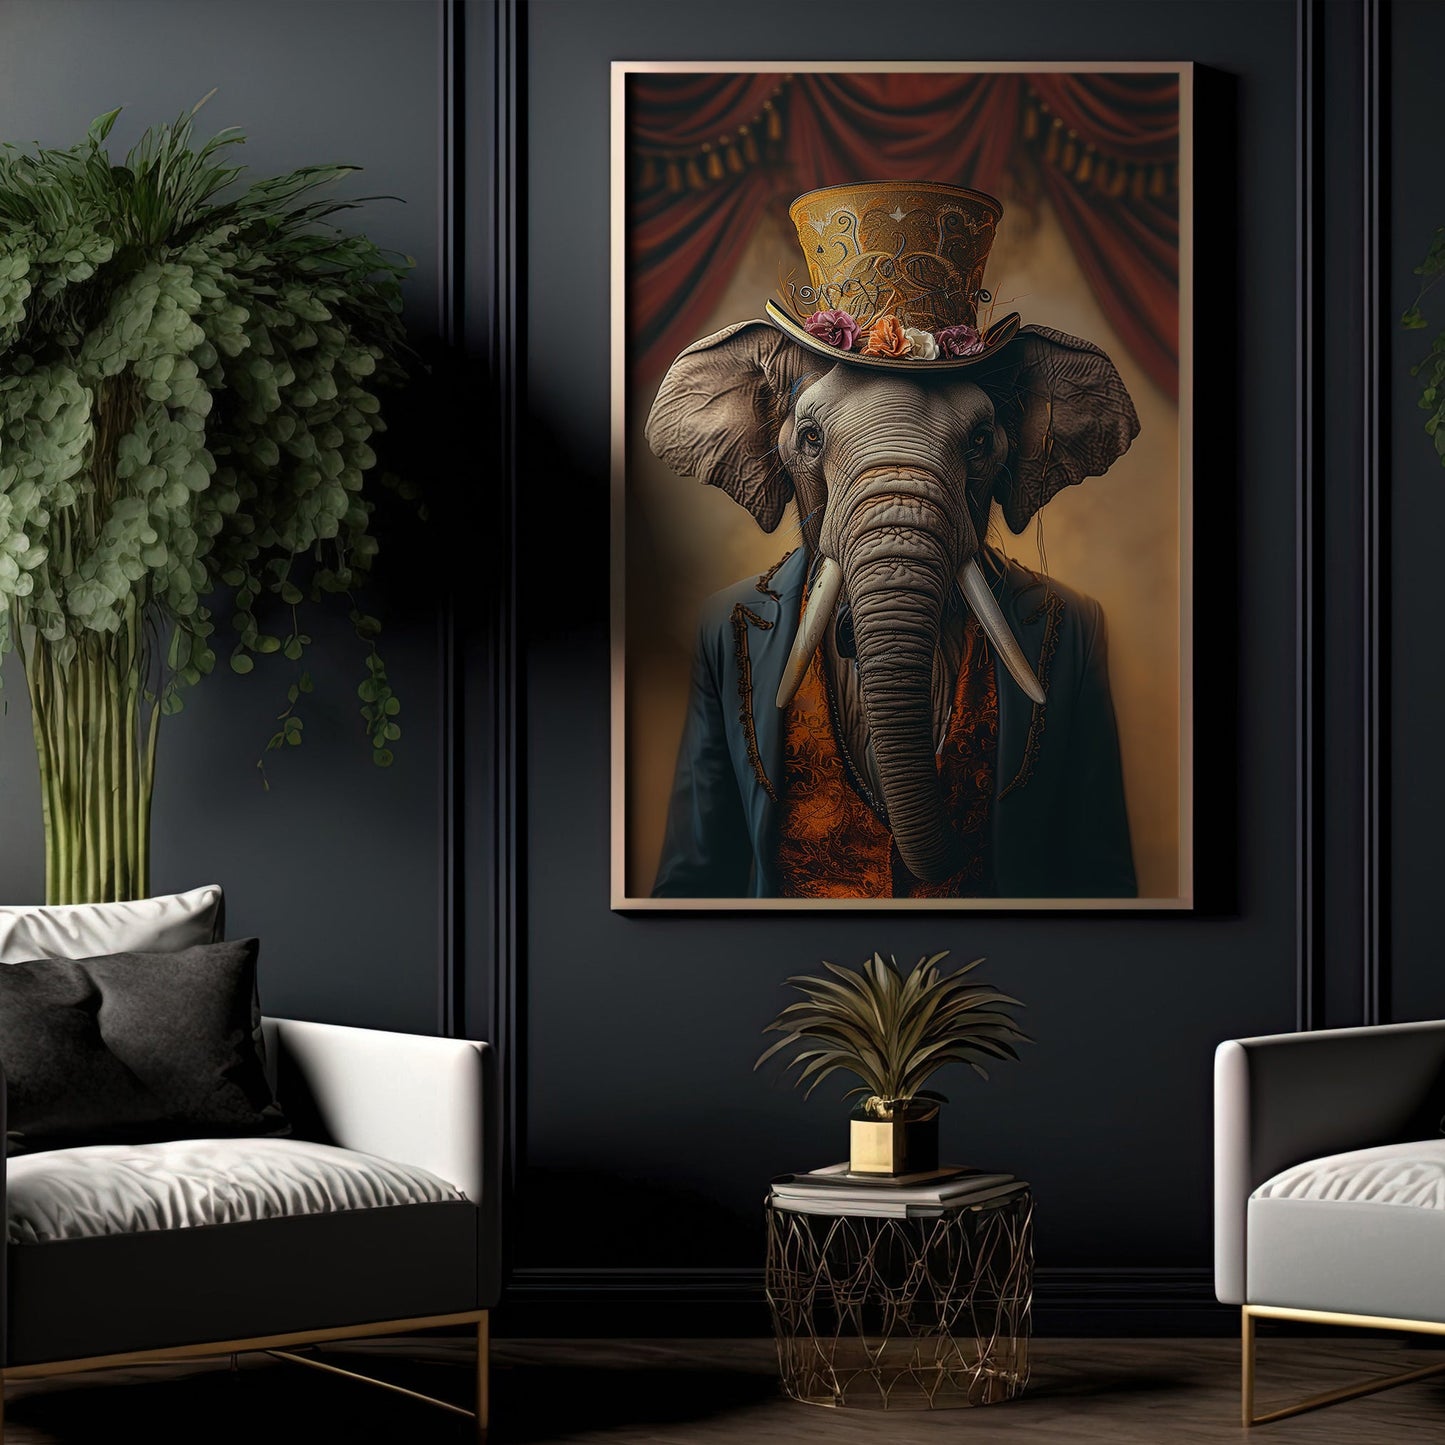 Gentleman Elephant In Victorian Suit, Victorian Elephant Canvas Painting, Victorian Animal Wall Art Decor, Poster Gift For Elephant Lovers